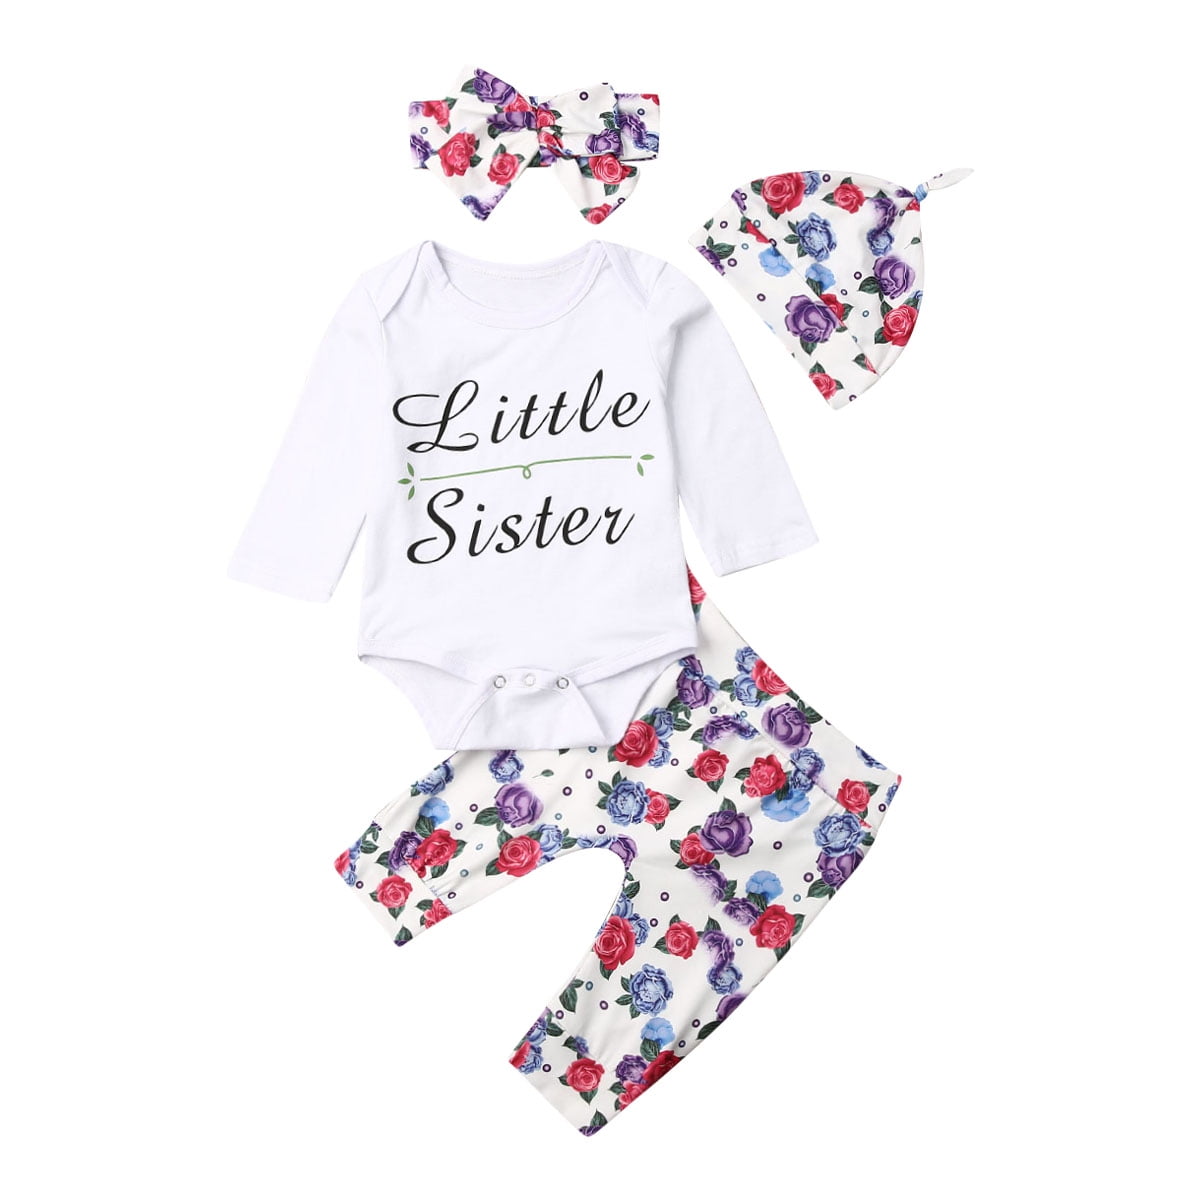 Toddler Newborn Baby Girls Long Sleeve Bodysuit Romper Floral Pants Hats Outfits Set